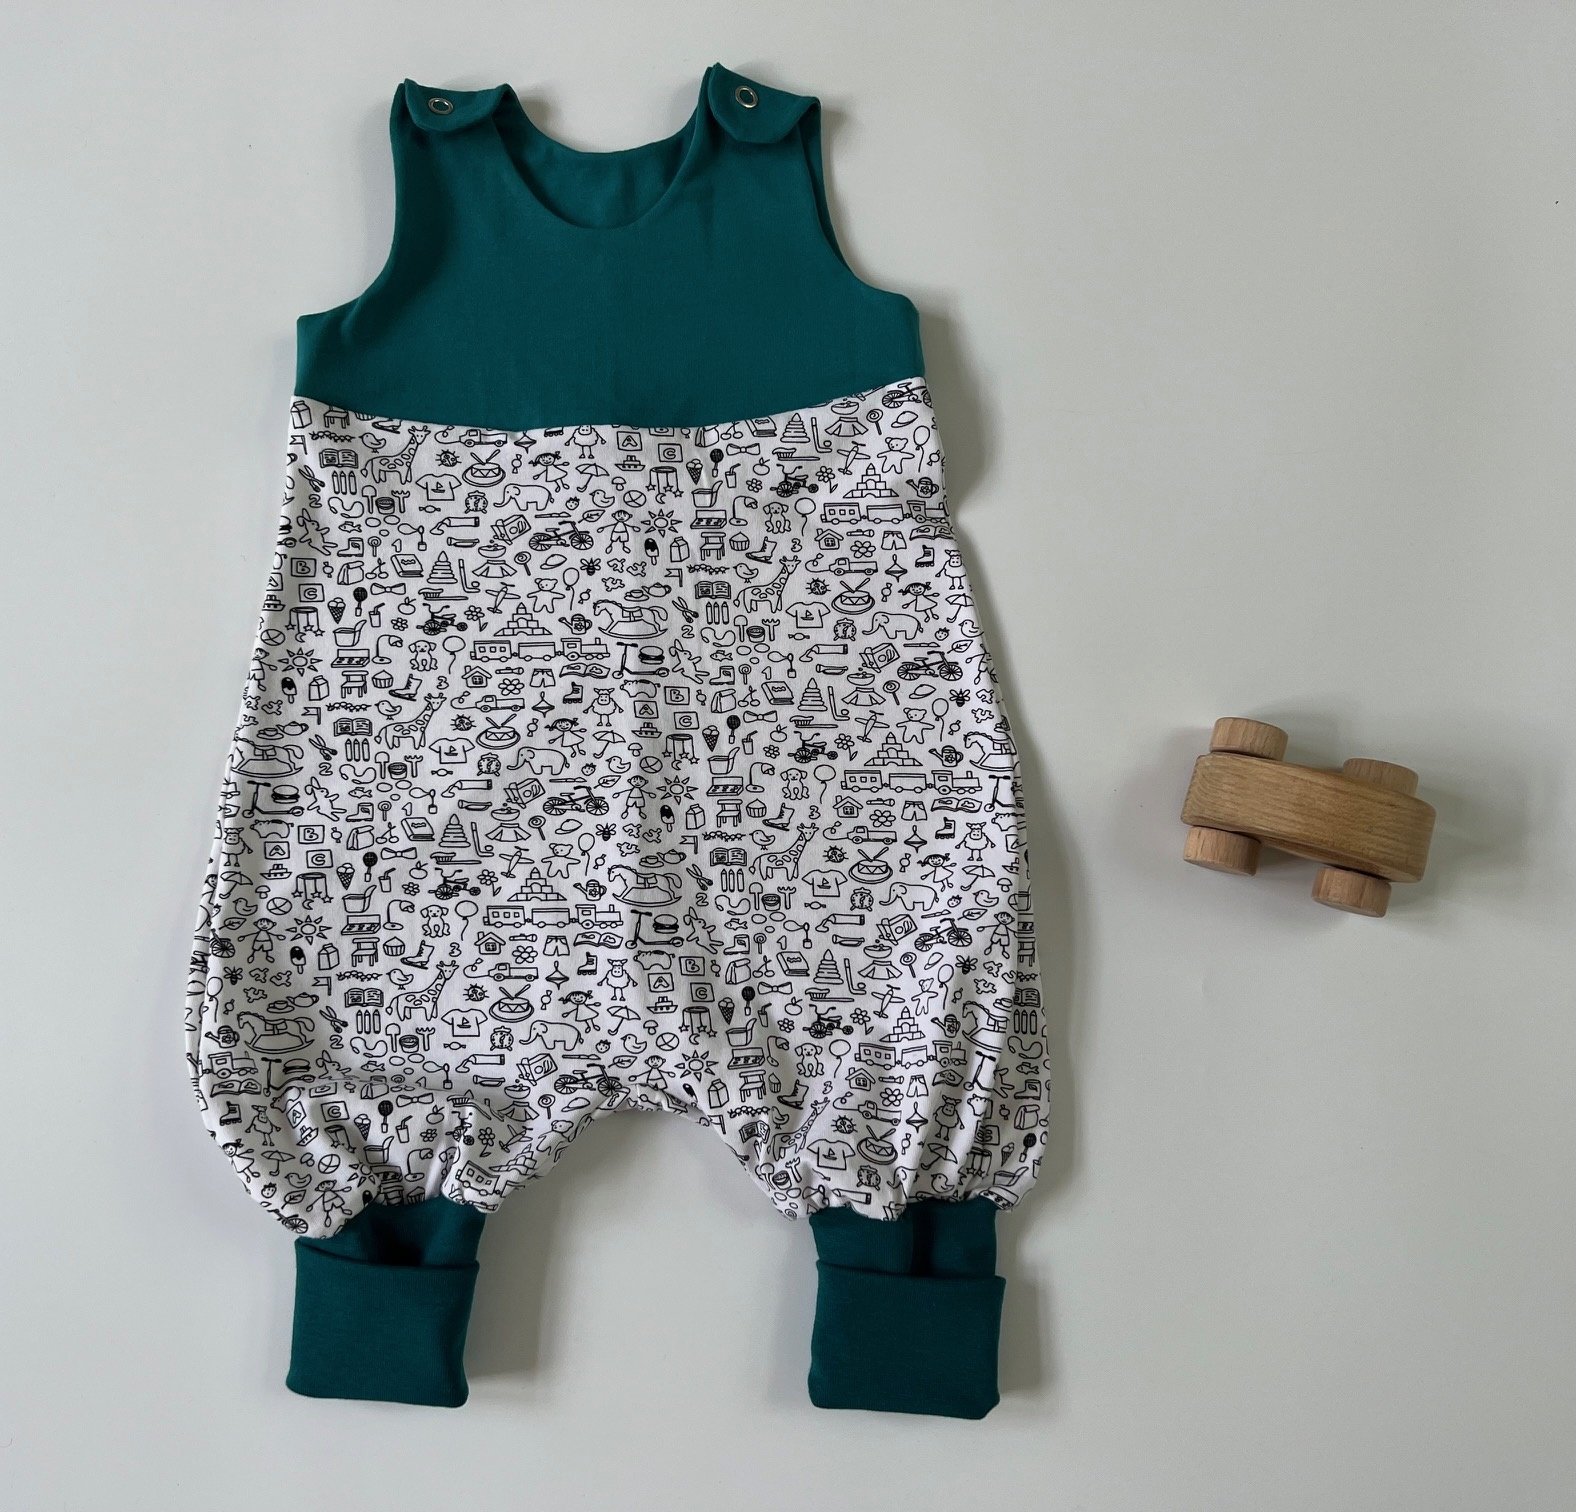 Baby romper black/white - with growing cuffs!